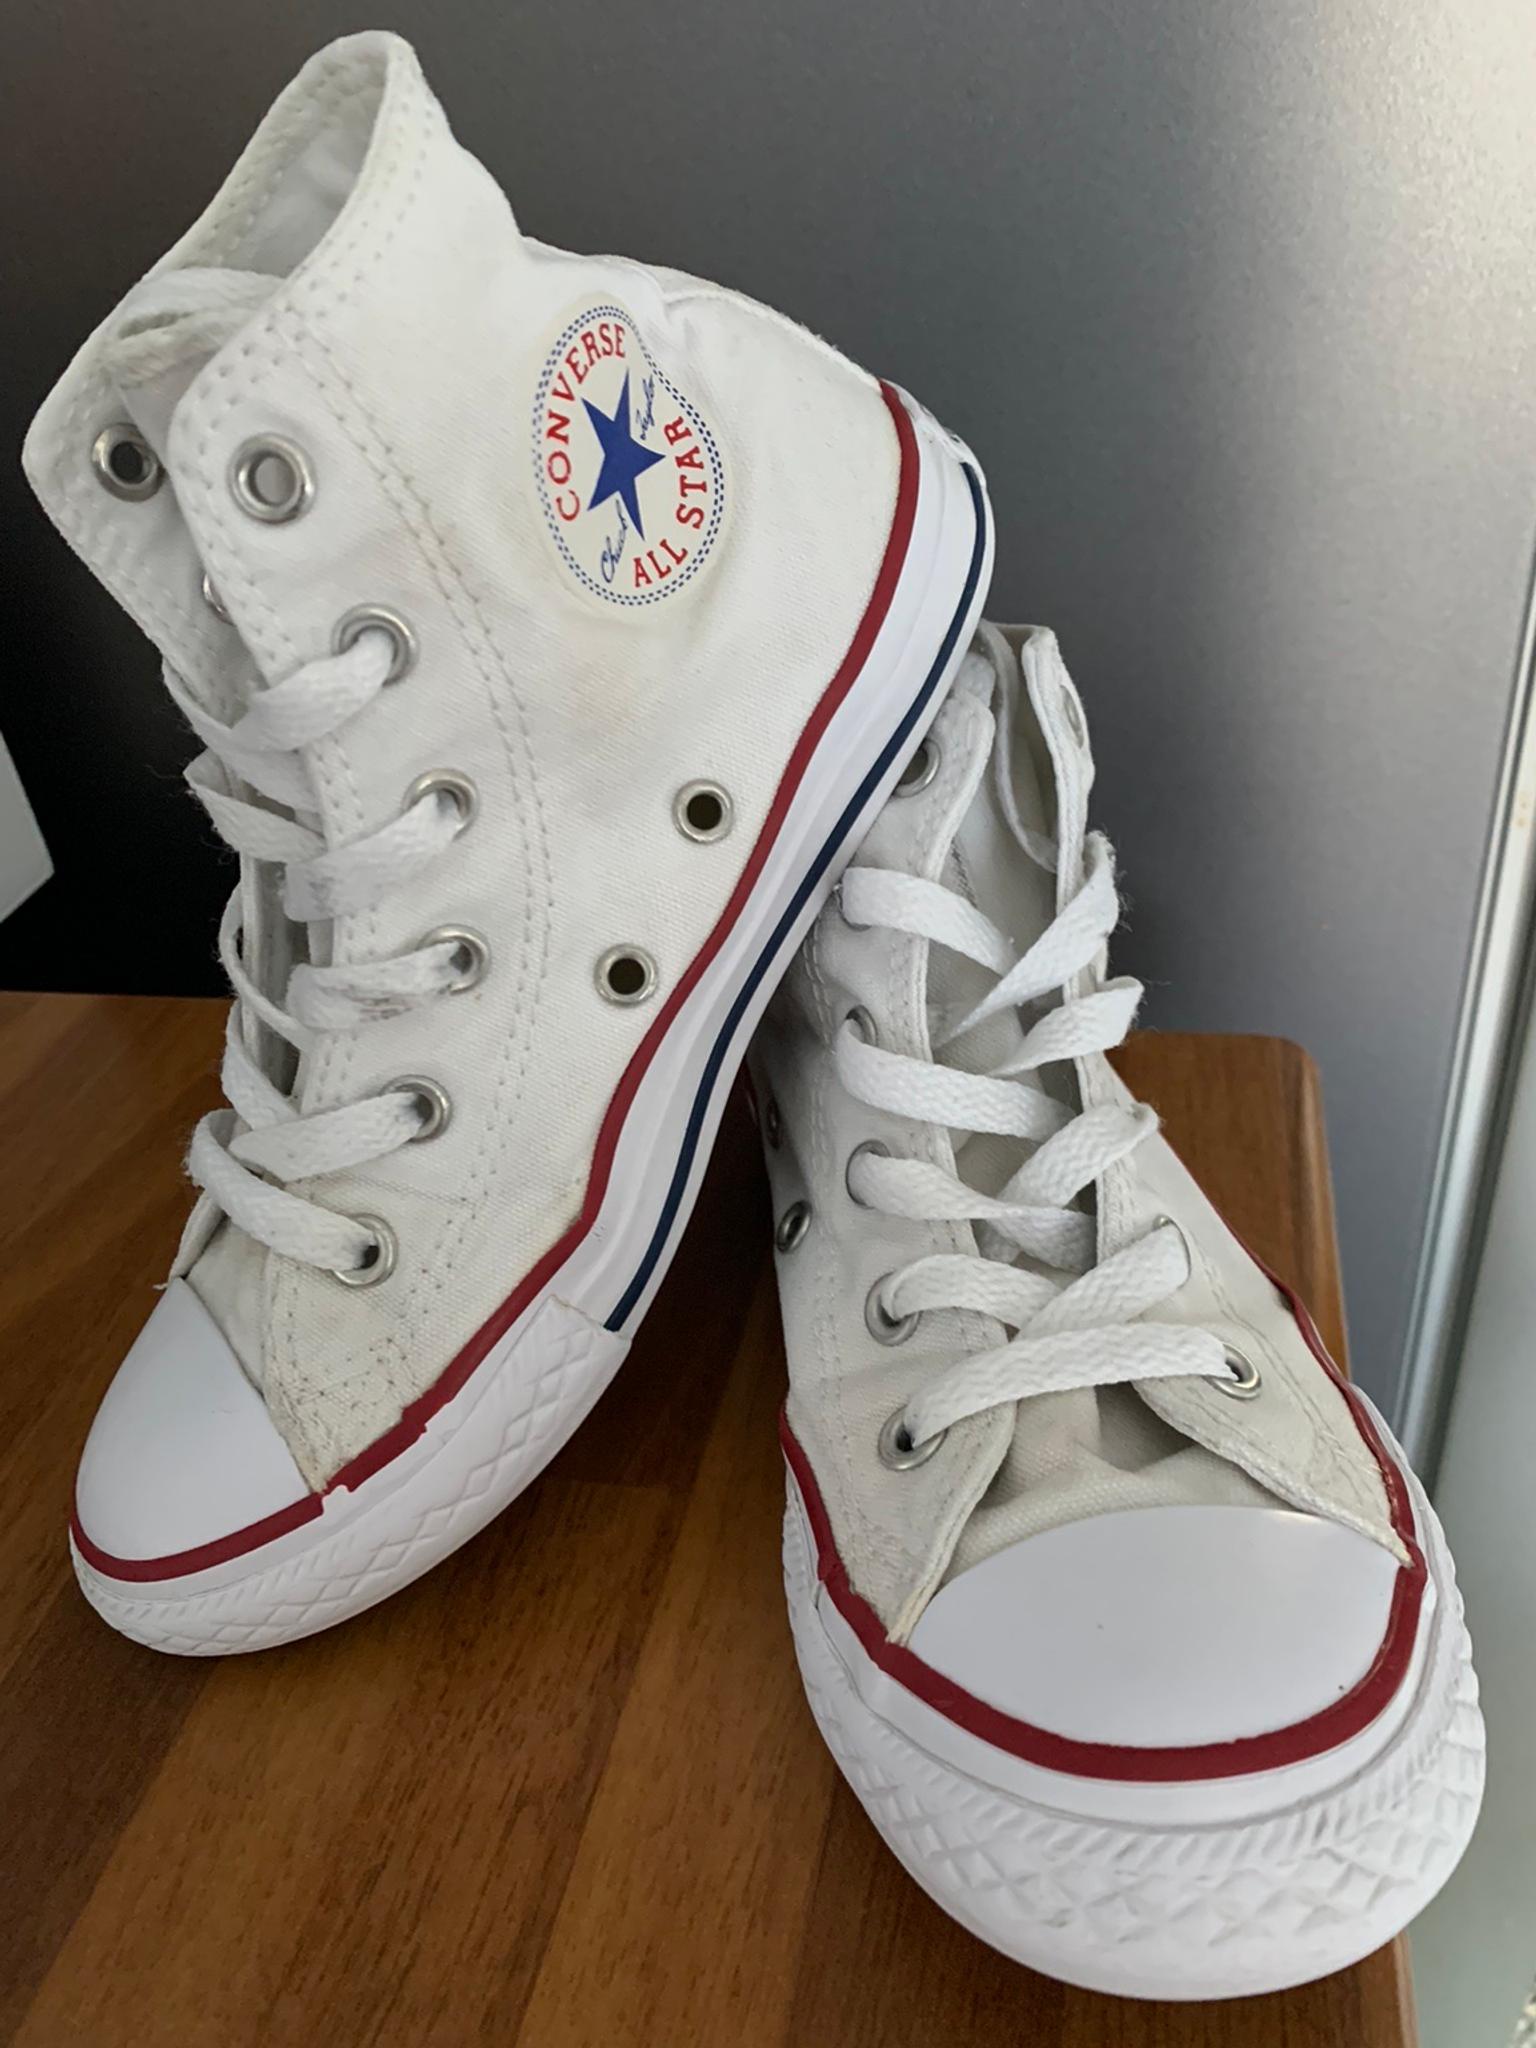 Converse 31 in 21013 Gallarate for €10.00 for sale | Shpock